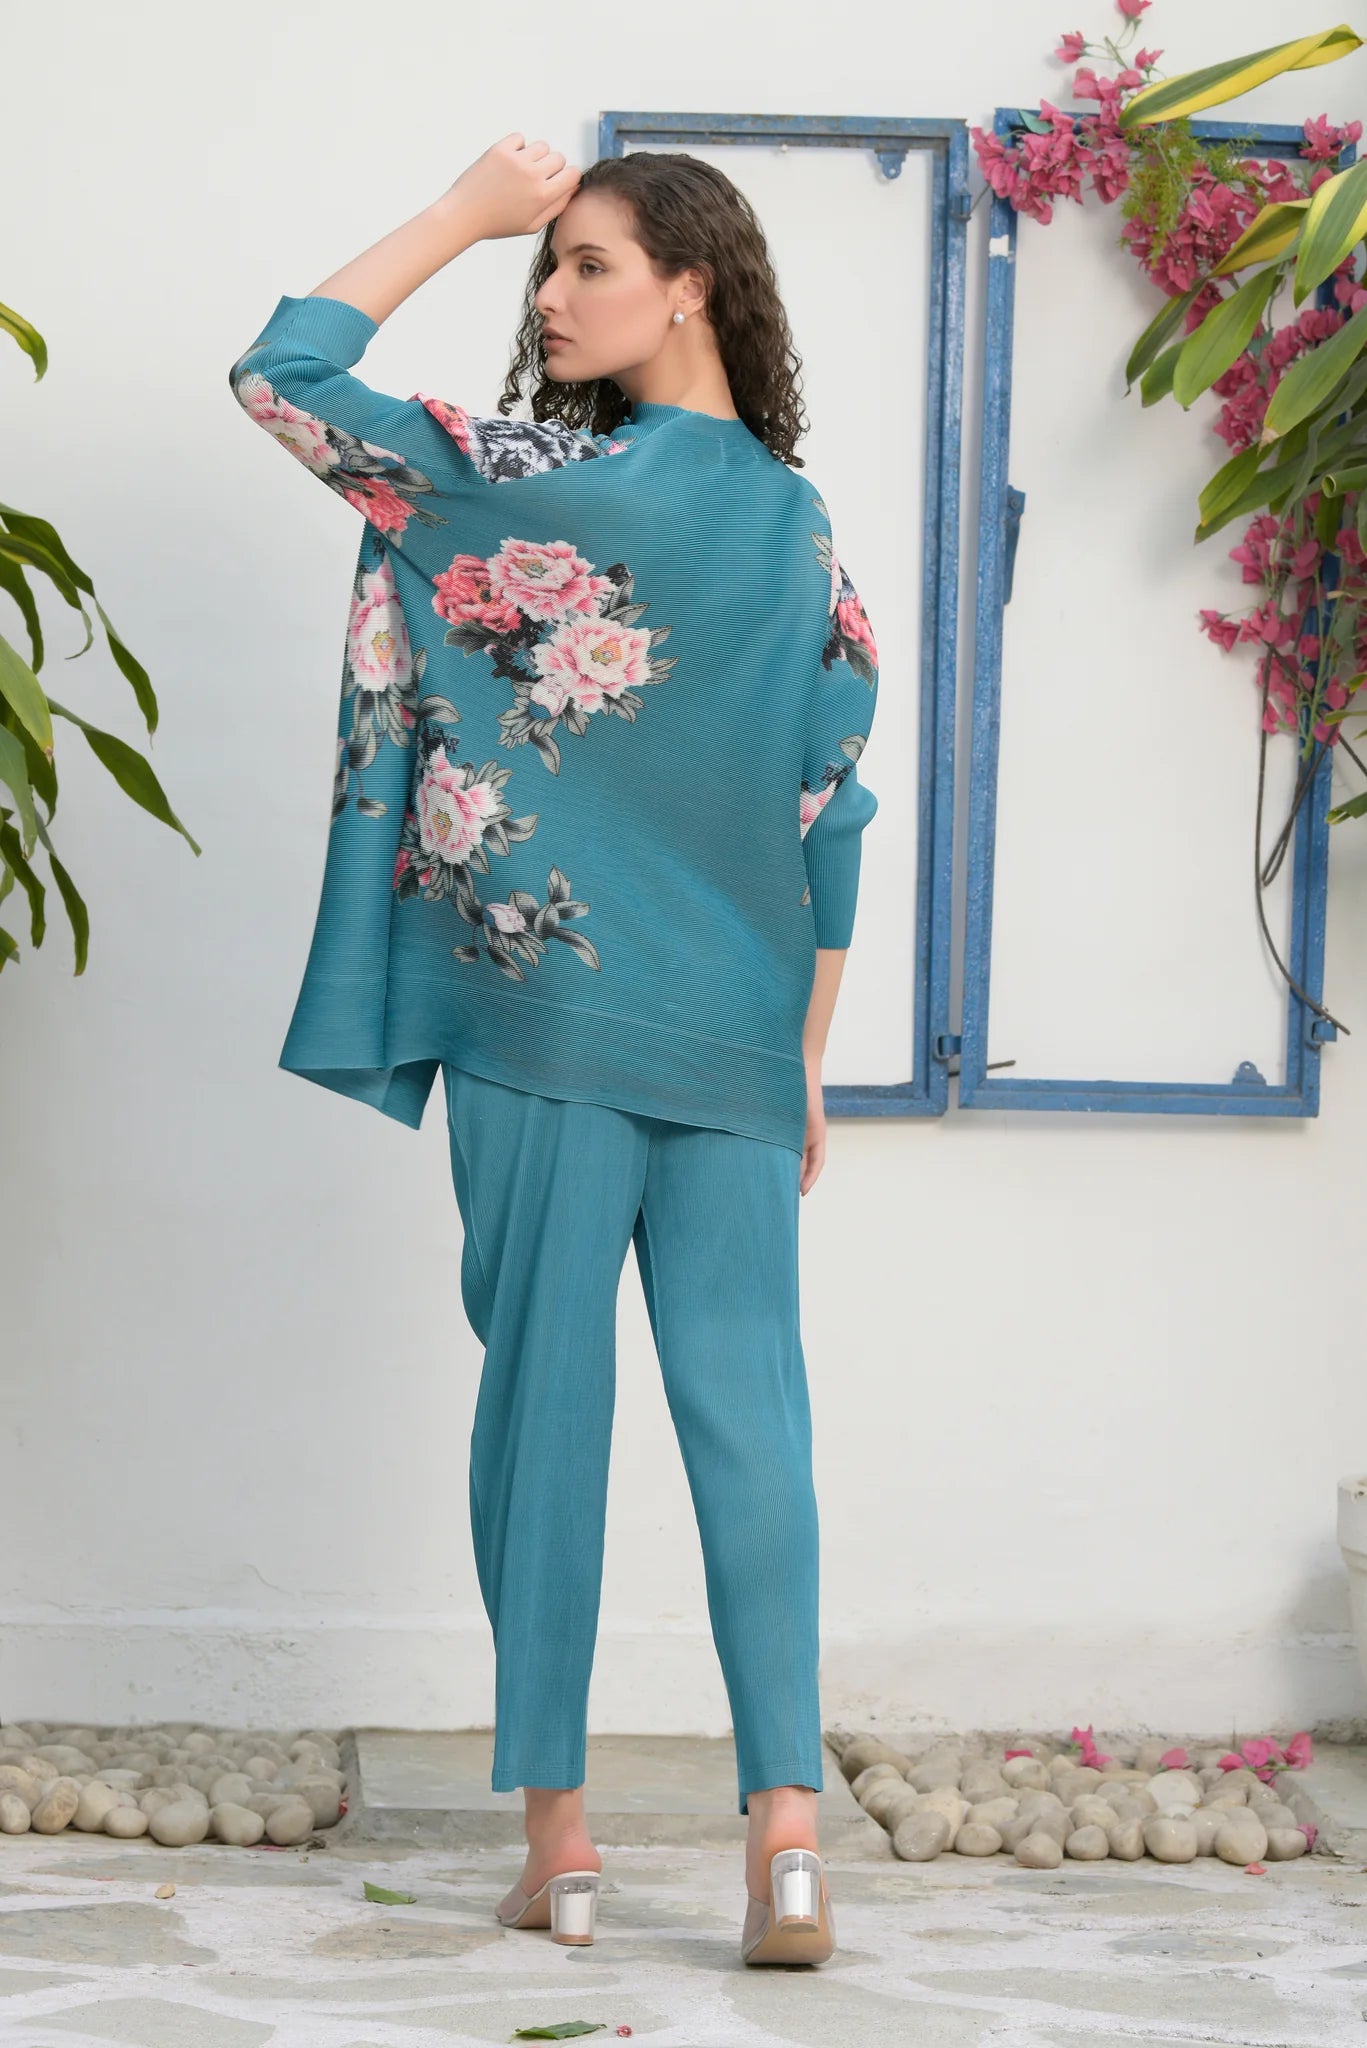 Image of This FAIRLIE FLORAL SHIRT WITH PLEATED PANTS - TEAL set is designed with quality in mind. Its 100% polyester fabric is breathable, comfortable, and wrinkle-resistant. The pleated pants and floral shirt will keep you looking stylish and ready for any occasion. From savoirfashions.com